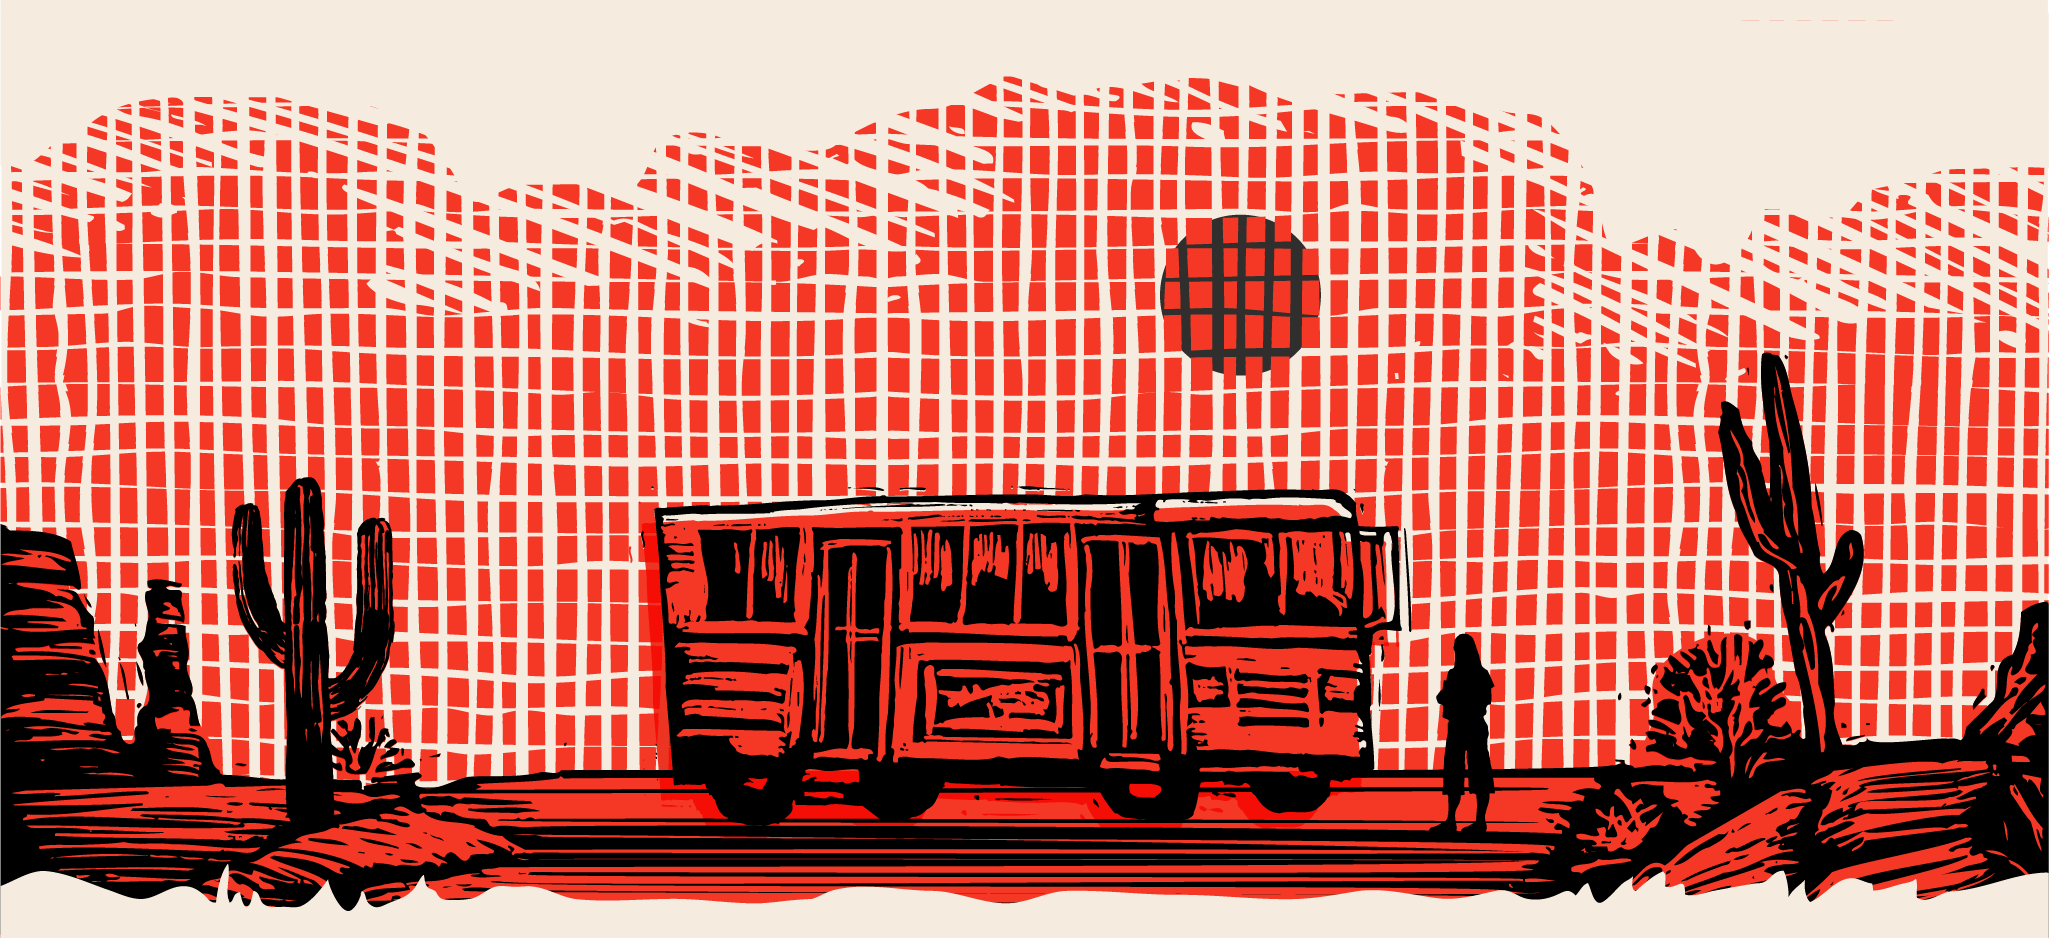 Illustration of a bus in the desert, under the sun.